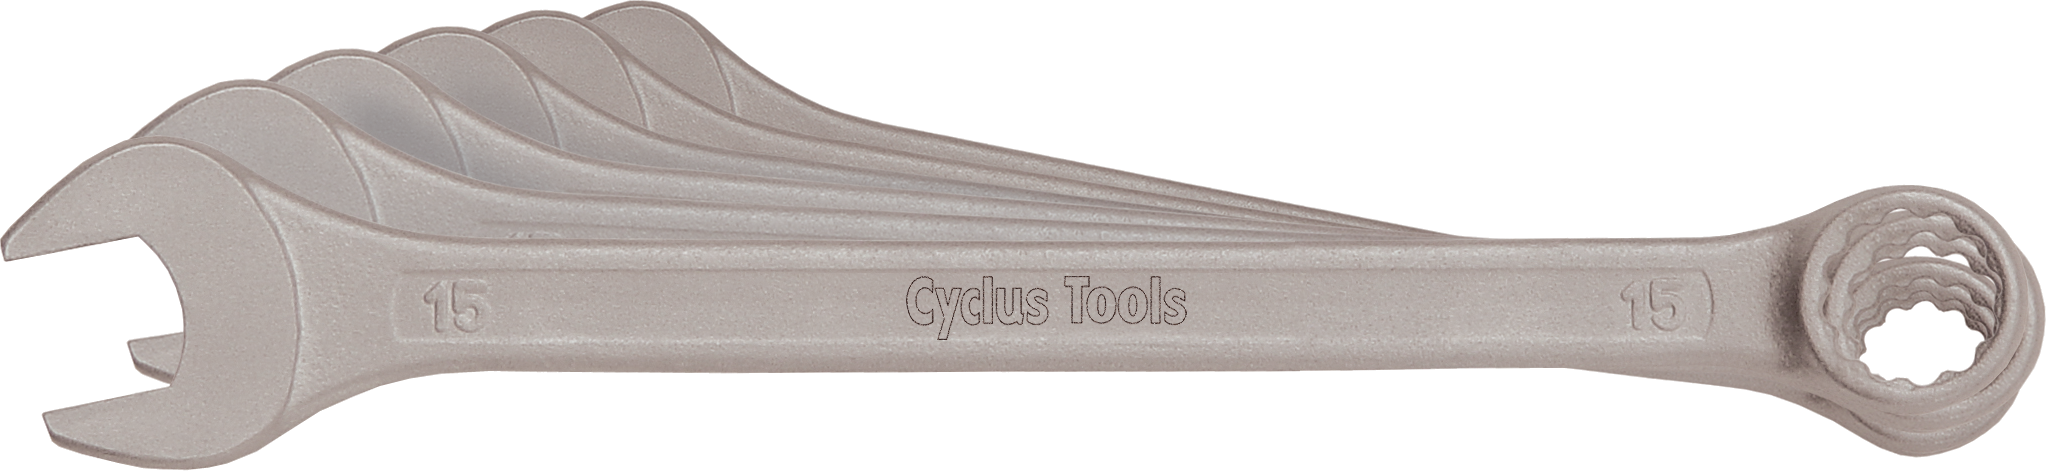 CYCLUS TOOLS combination wrench set (8 pcs)